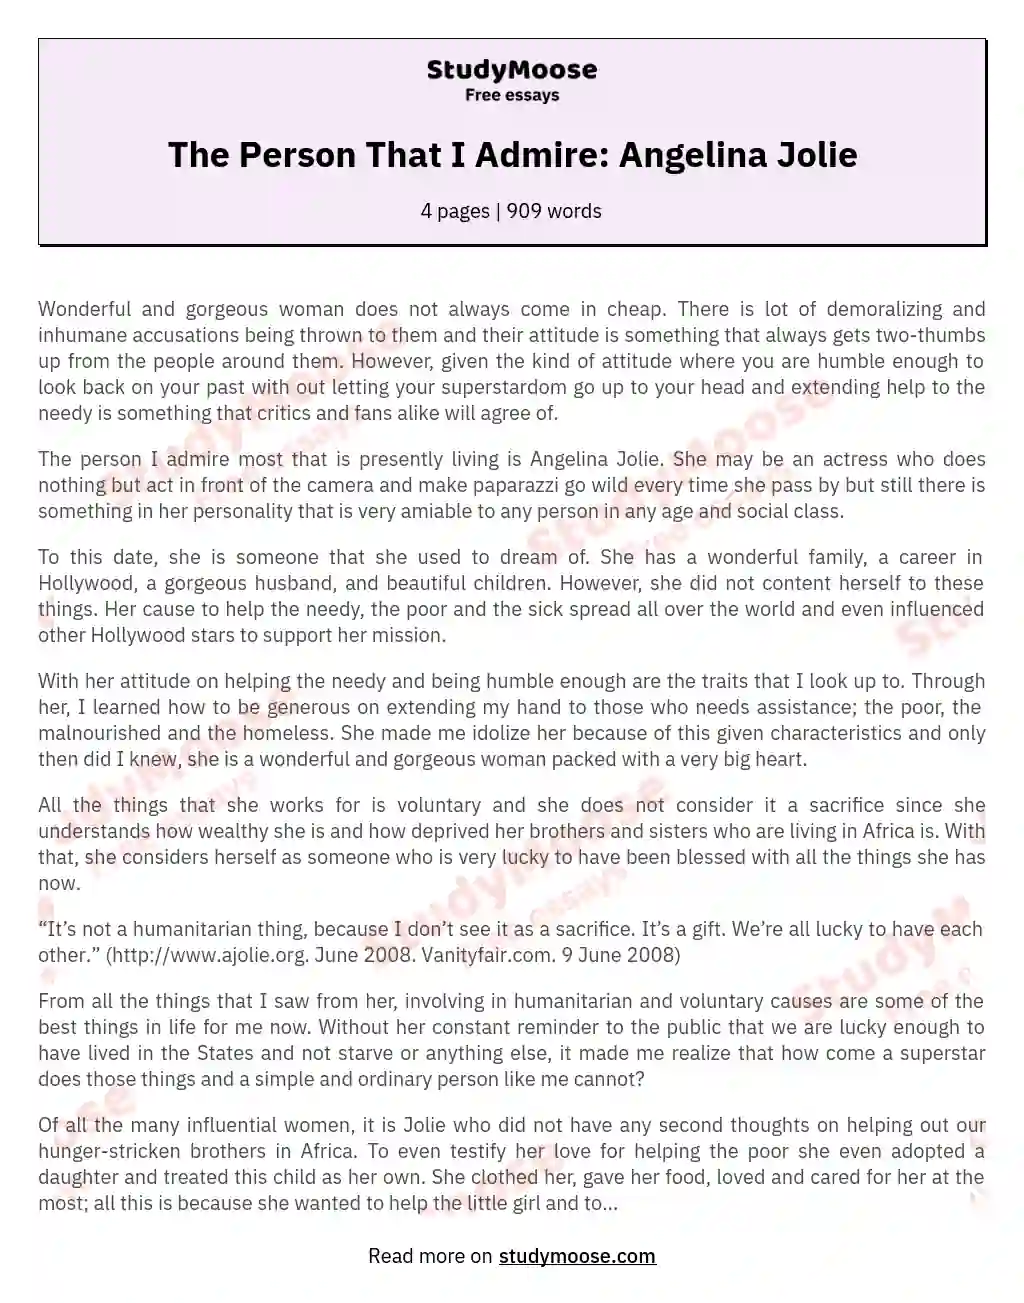 The Person That I Admire: Angelina Jolie